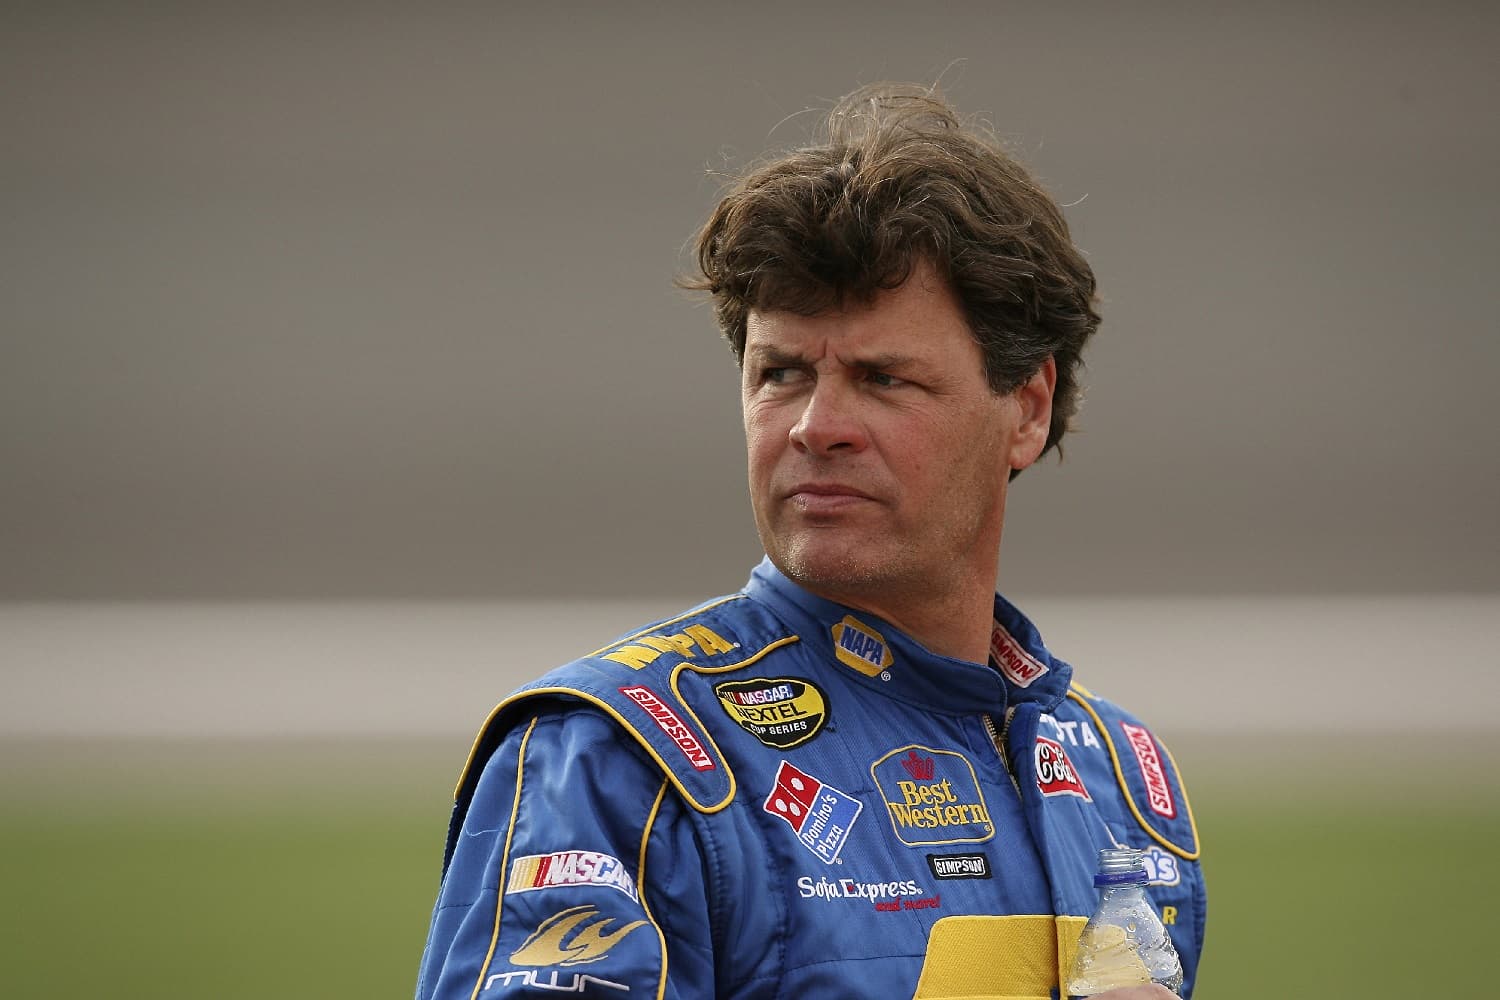 Michael Waltrip on pit lane prior to his qualifications run for the UAW Daimler Chrysler 400 at Las Vegas Motor Speedway on March 9, 2007.